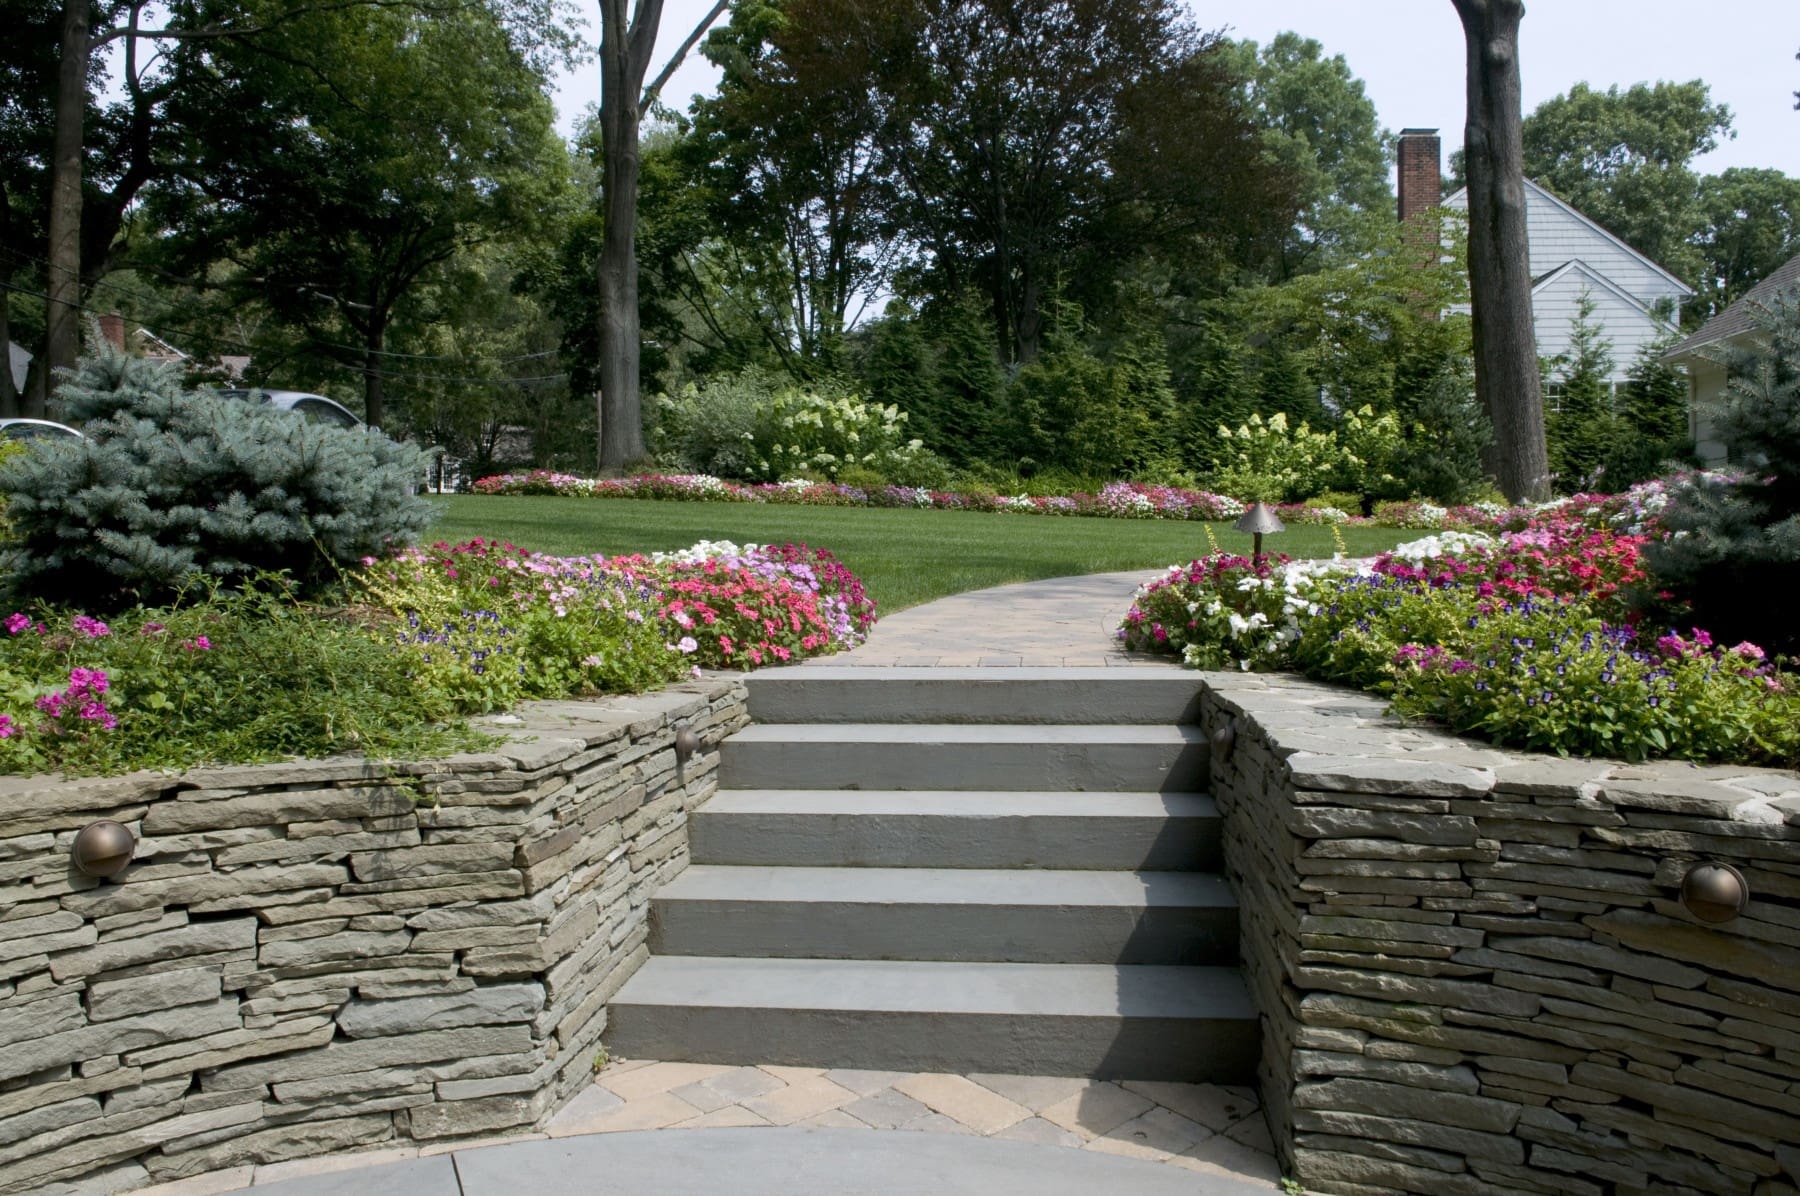 Best Landscape Design Apps For Ipad, Is There A Free App For Landscape Design